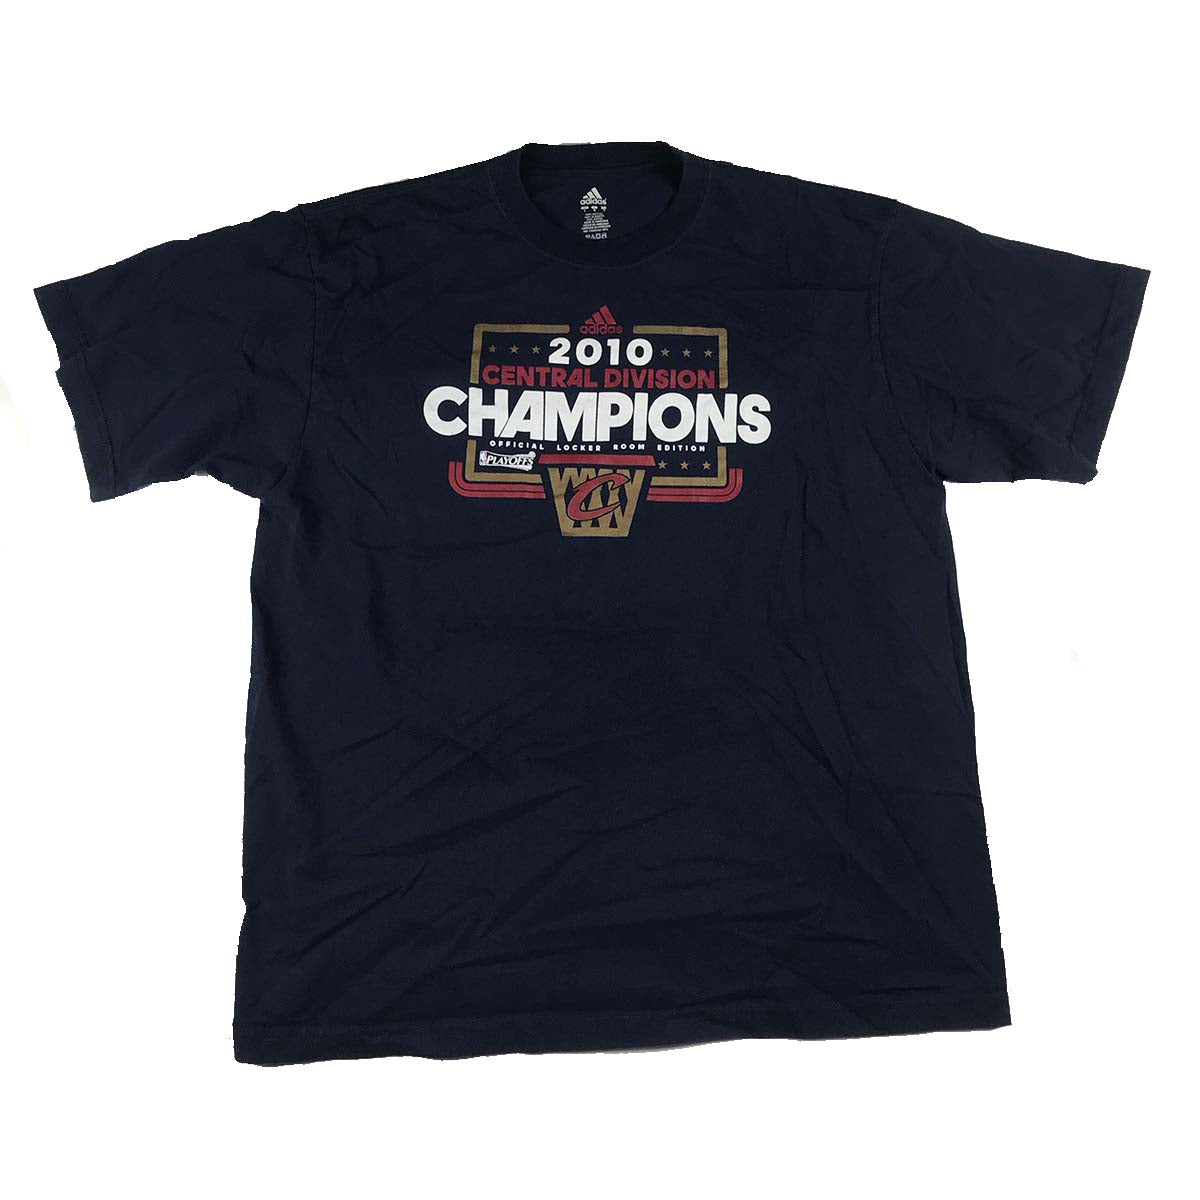 Cleveland Cavaliers 2010 Central Division Champions Tshirt L